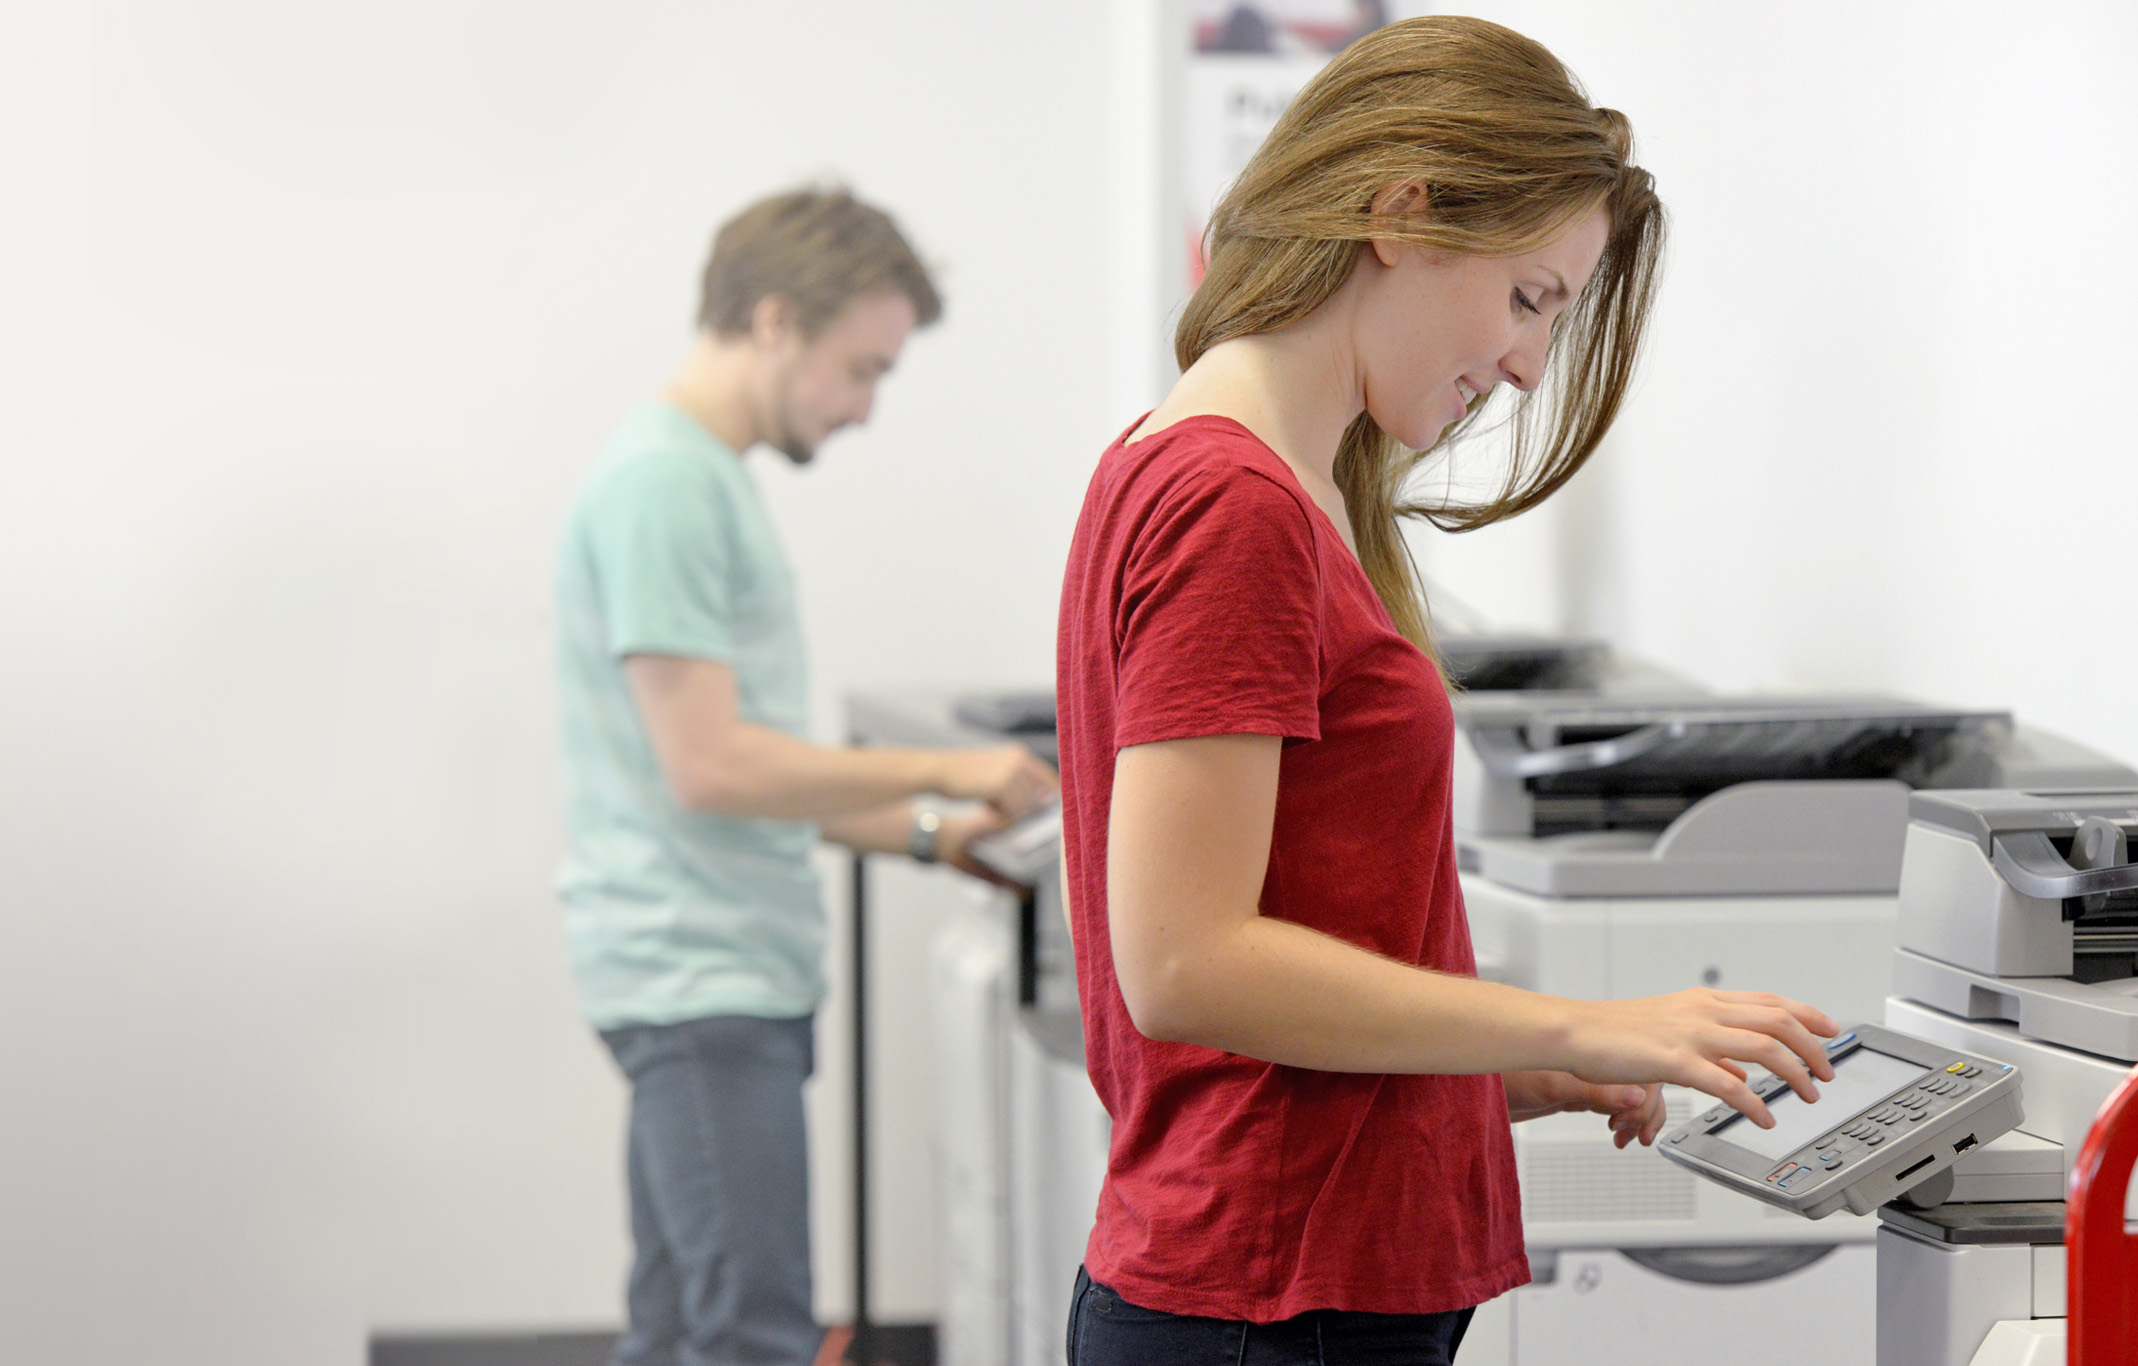 Woman in red shirt at fax machine with man in light green shirt in the background at another fax machine